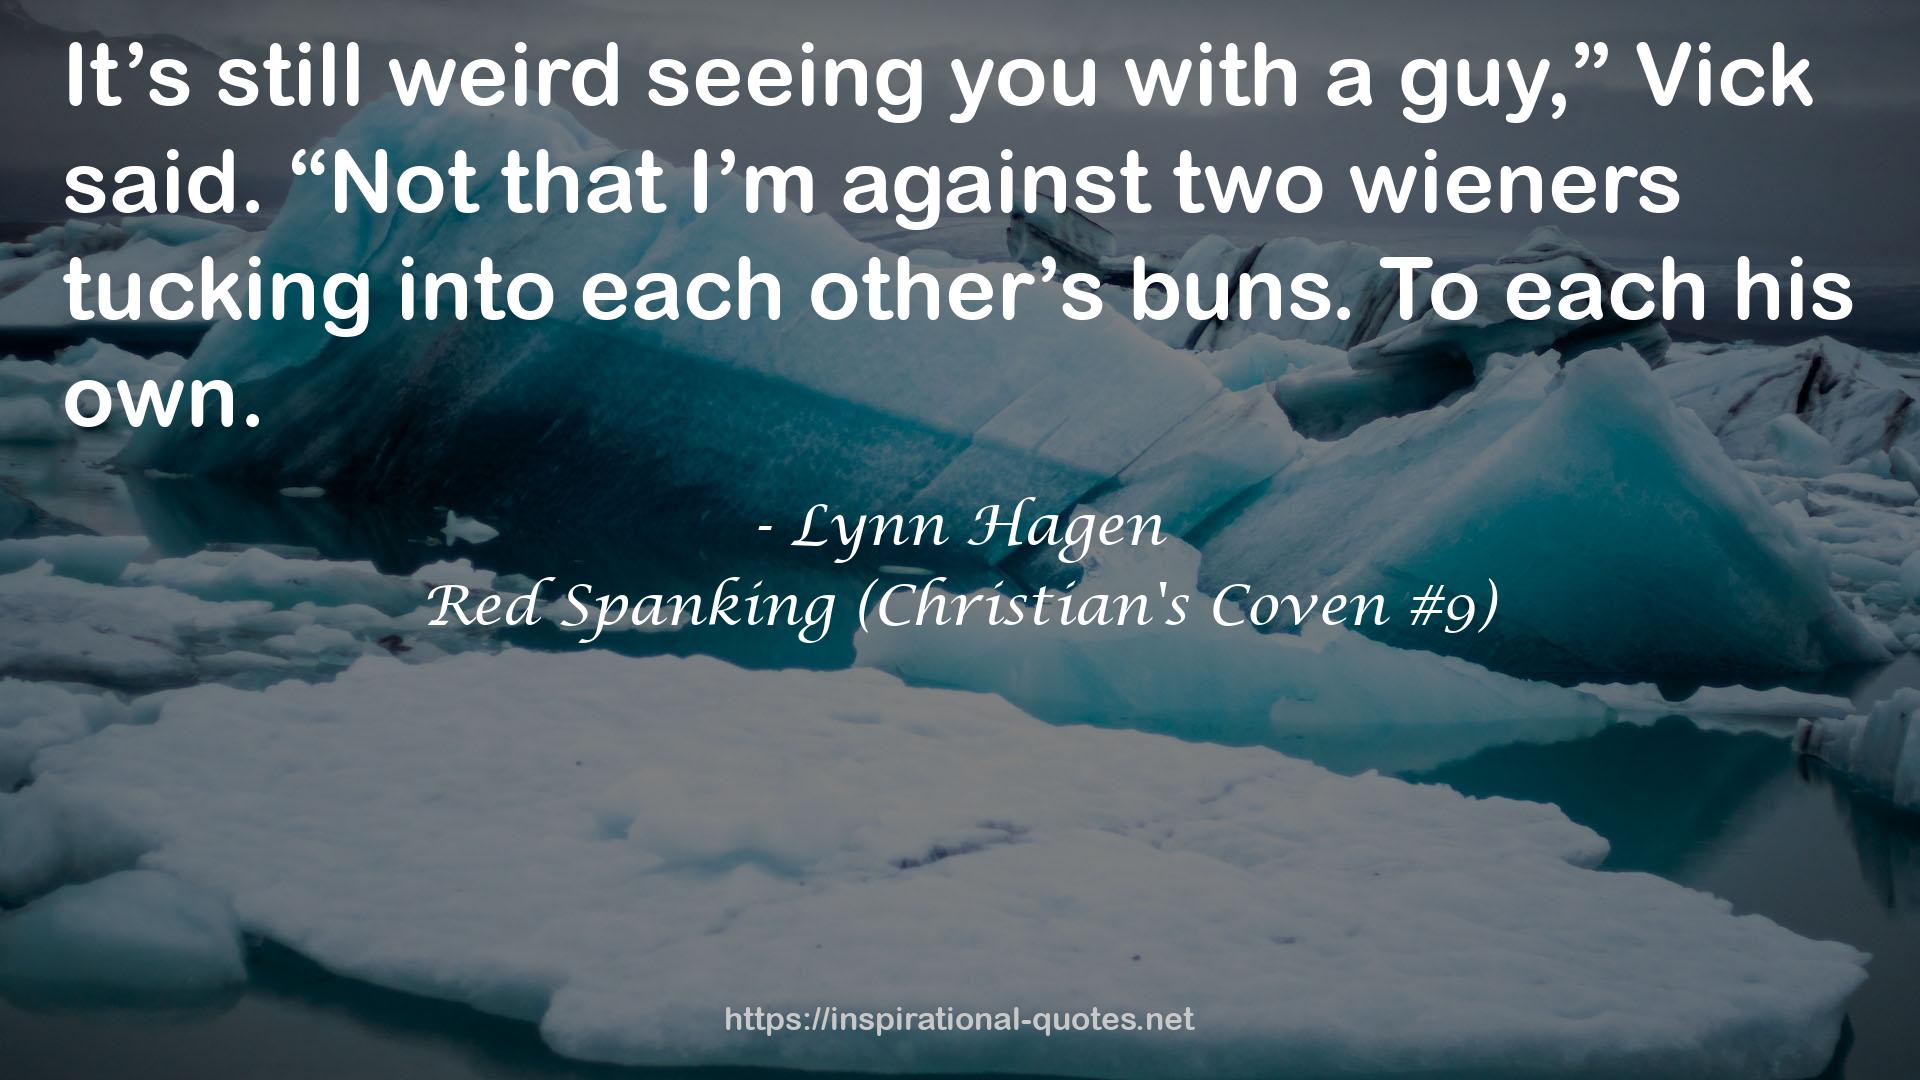 Red Spanking (Christian's Coven #9) QUOTES